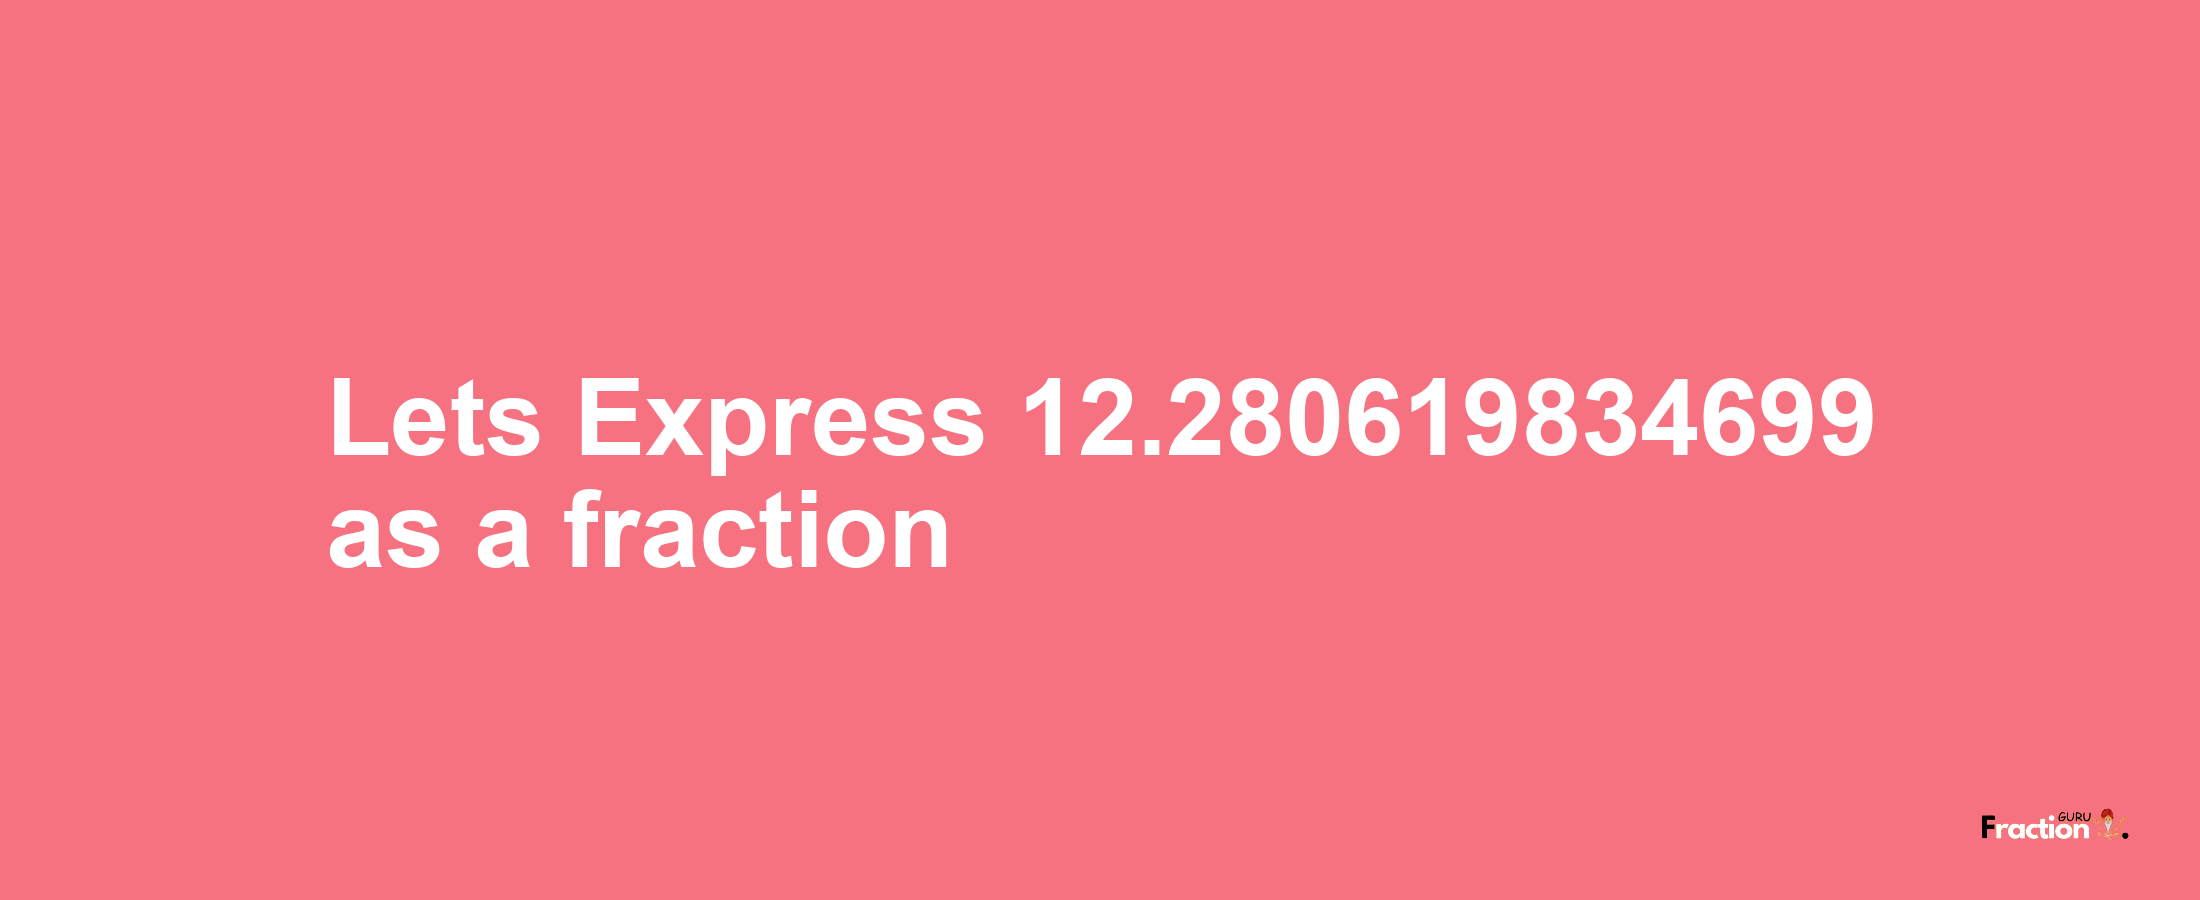 Lets Express 12.280619834699 as afraction